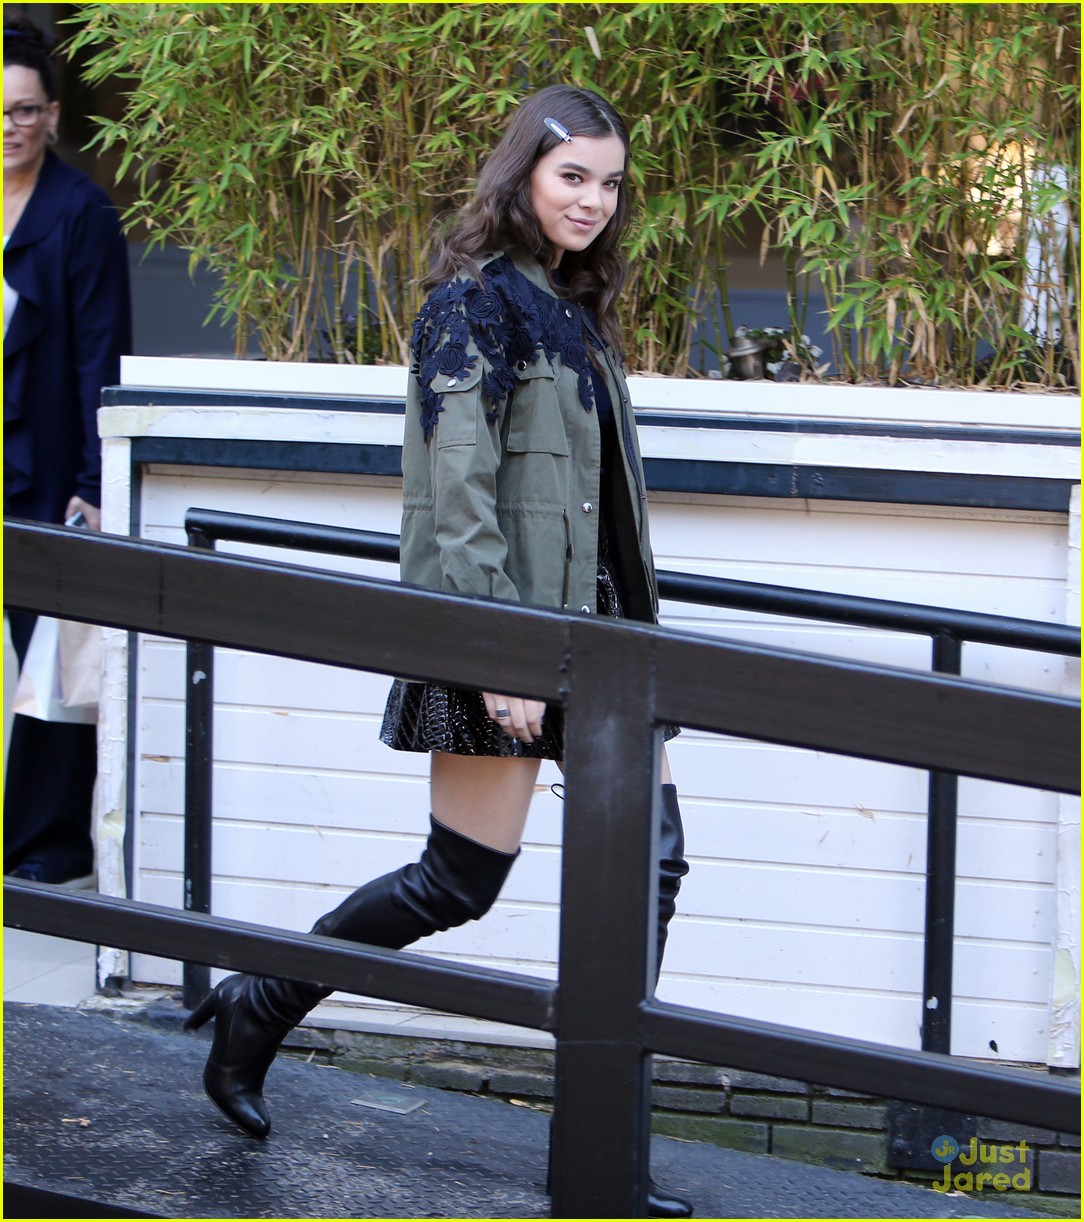 quotes from hailee steinfeld songs